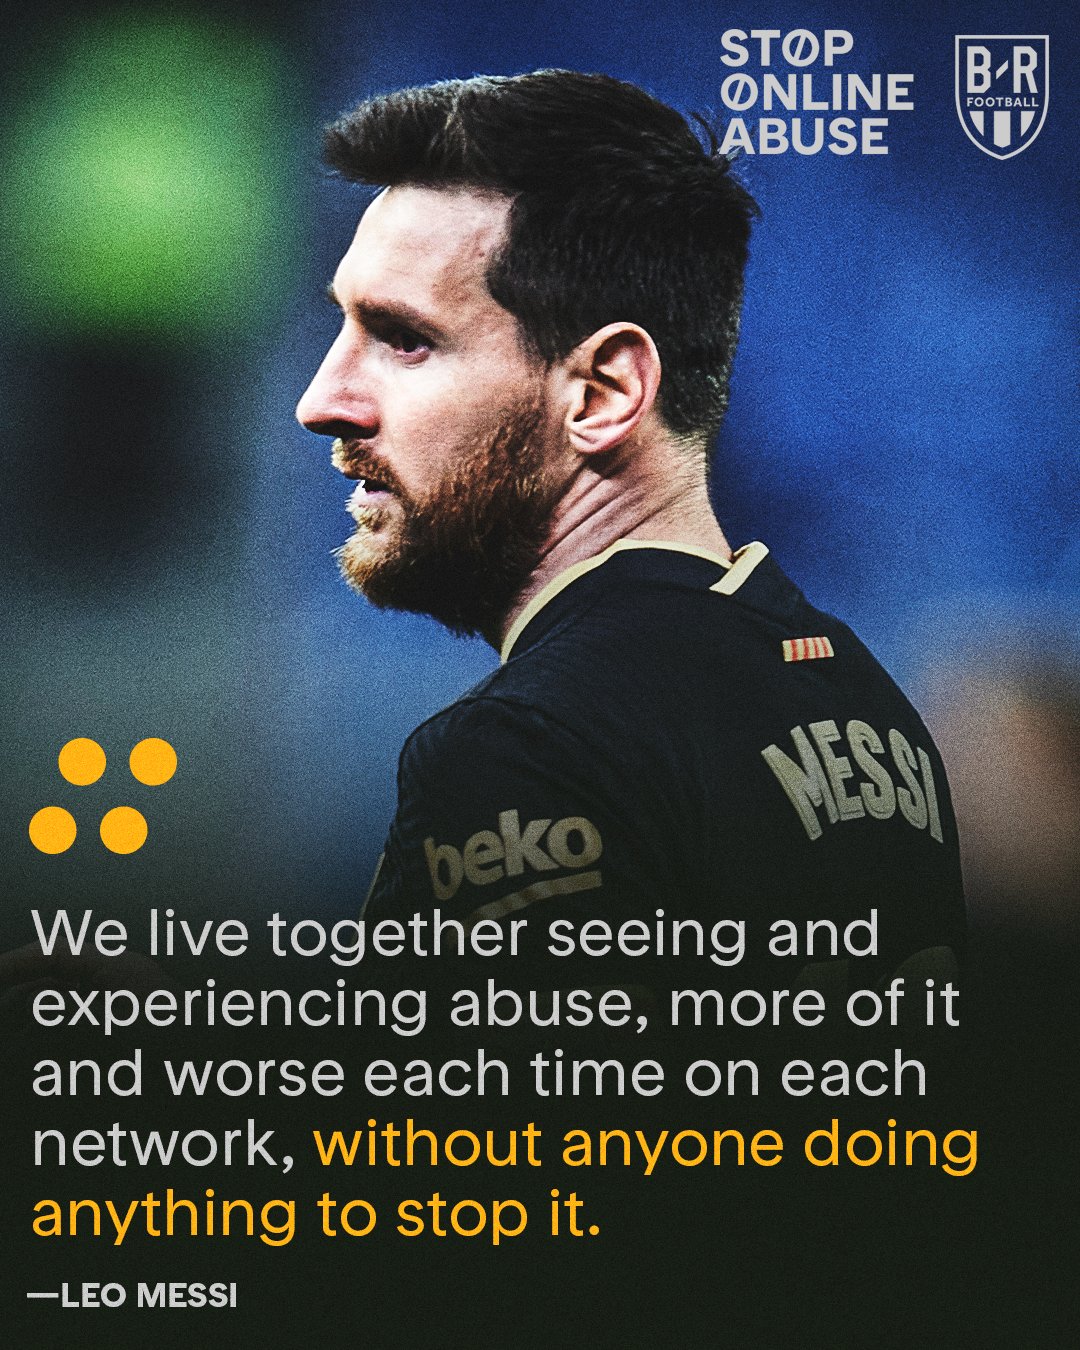 Lion Messi's worth $1BILLION. What's your take on his business?, Melissa  Abrantes🖍 posted on the topic